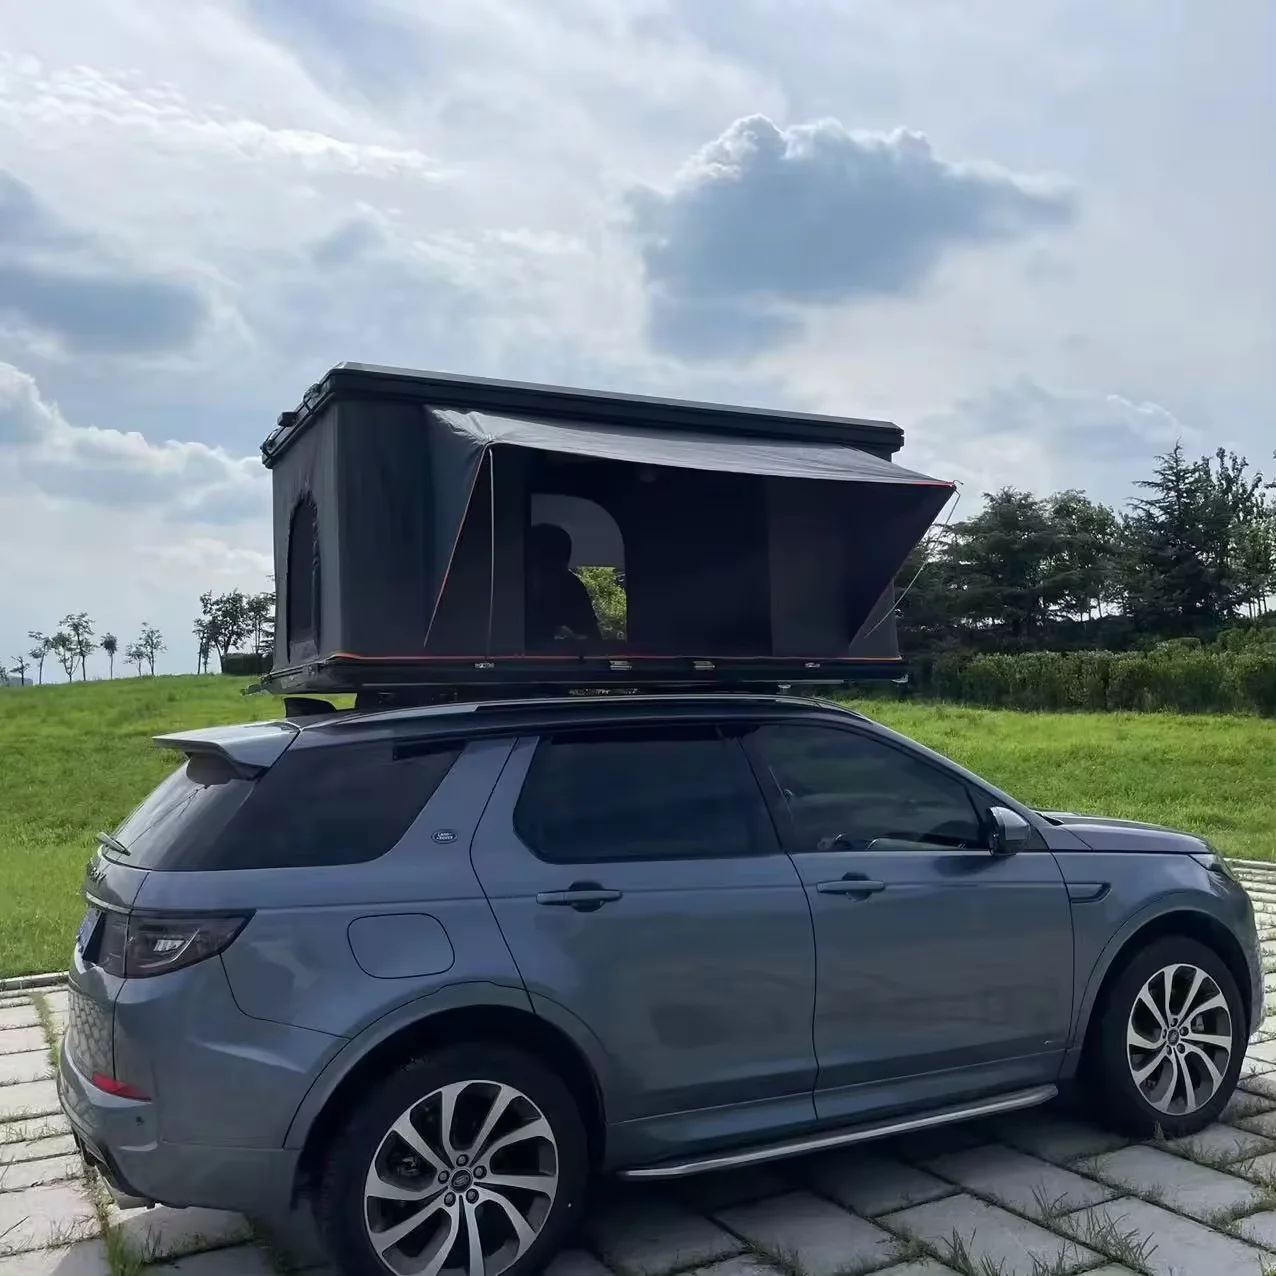 

Hard Cover Tent Car Roof Top Aluminum Honeycomb 2 Persons Outdoor Camping Travelling Tent Pop Up SUV Sedan